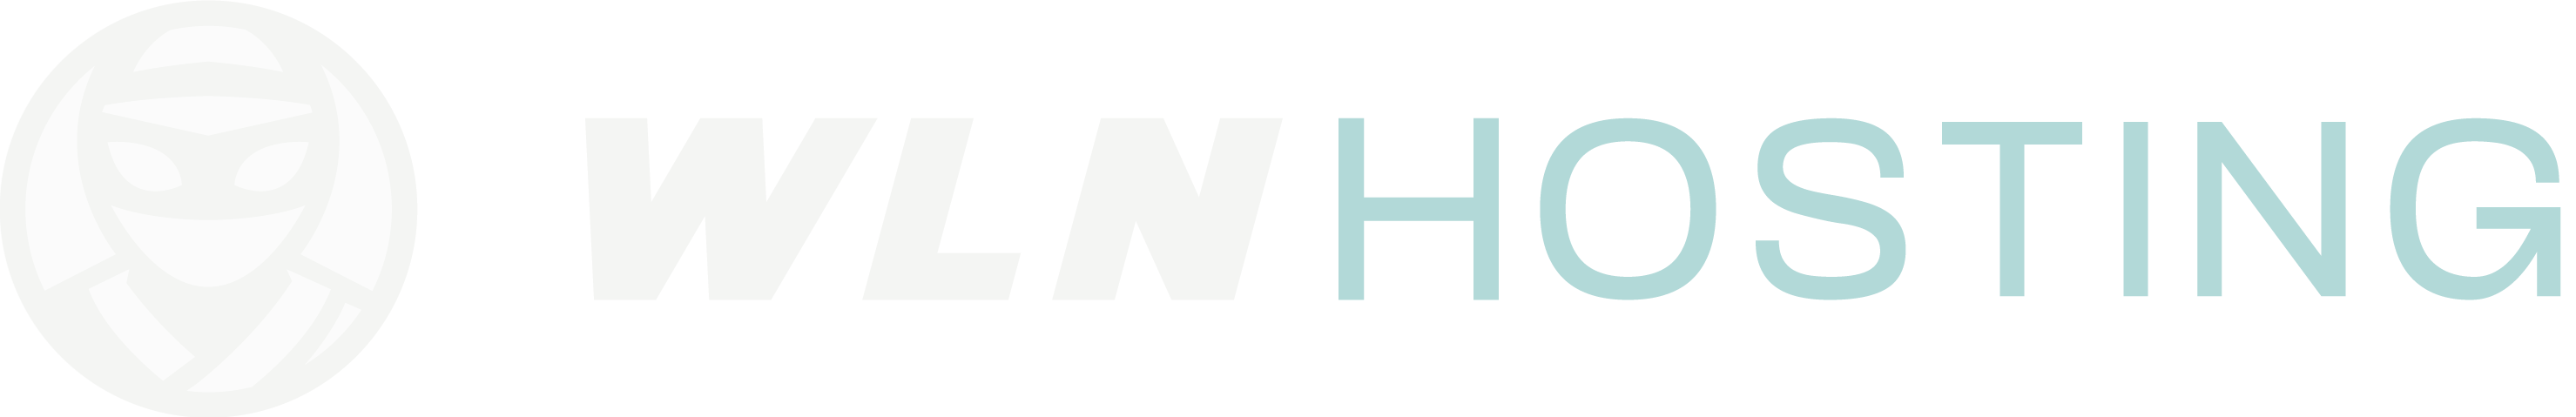 WLN Hosting Logo of WLN Hosting with a large white circle to the left and "WLN HOSTING" text in capital letters to the right. The text "WLN" is bold and white, while "HOSTING" is light blue, representing their commitment to fast WordPress Hosting. WordPress Hosting